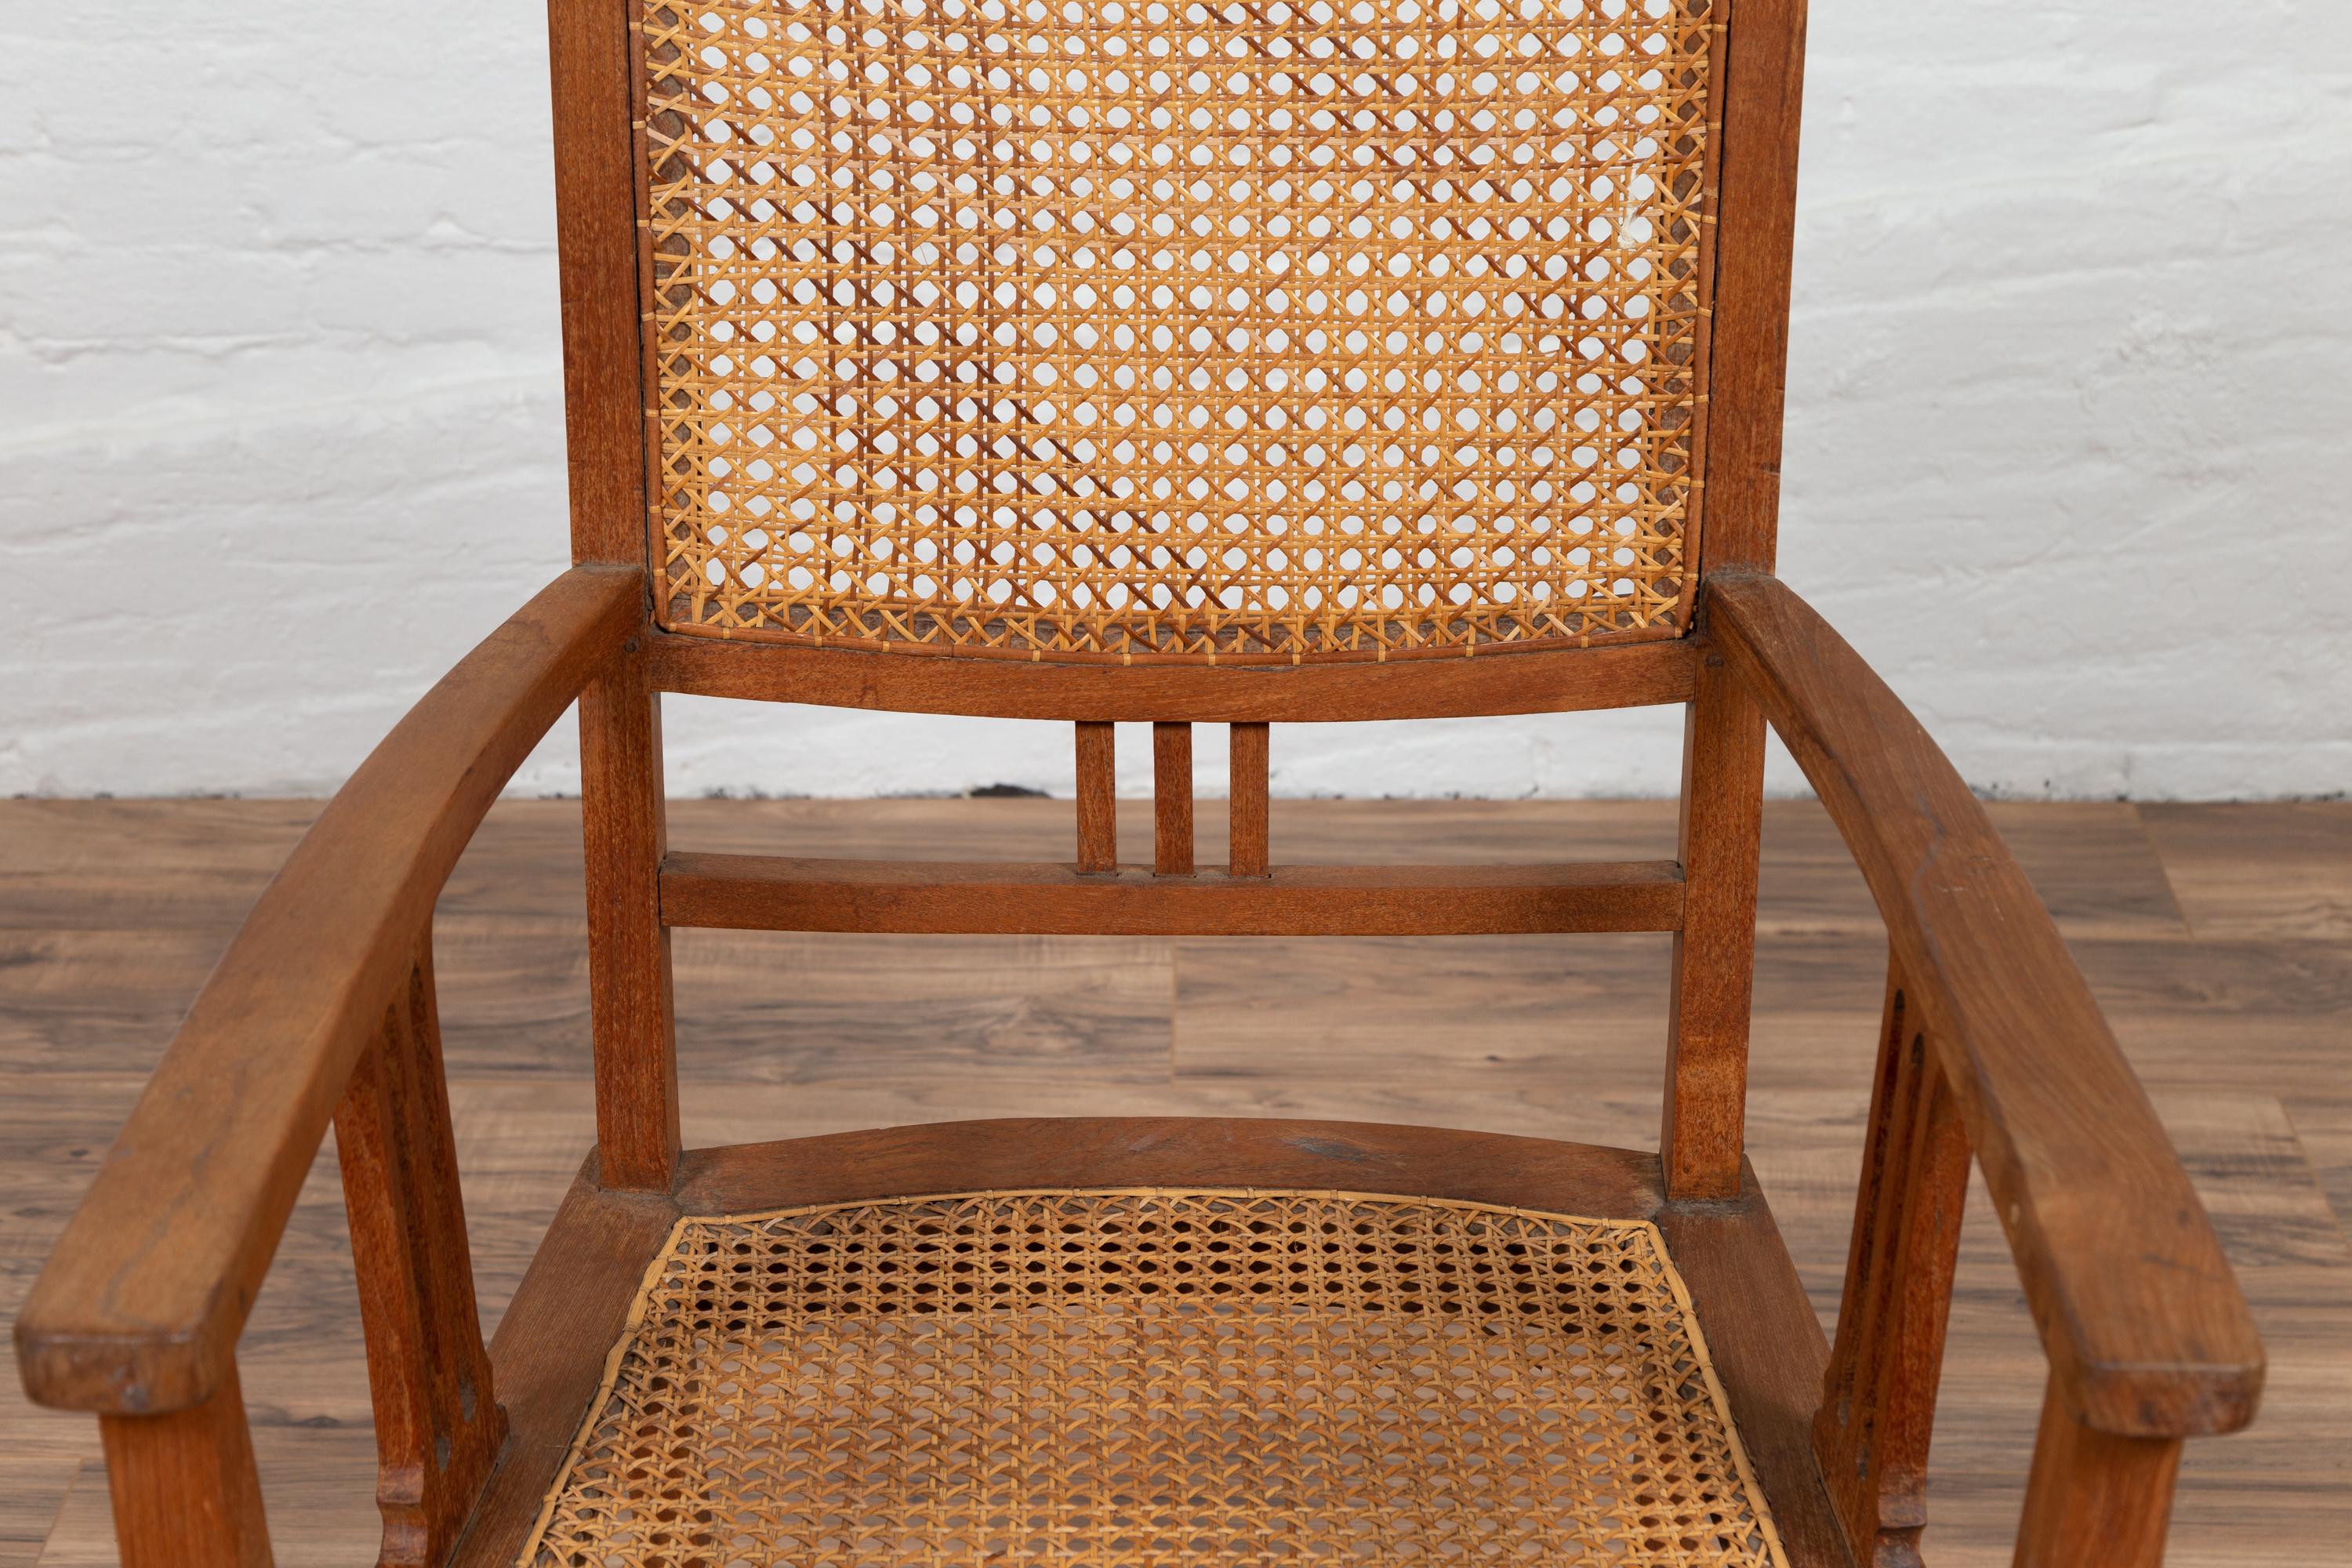 Woven Dutch Colonial Javanese Teak Armchair with Rattan and Triglyph Inspired Motifs For Sale